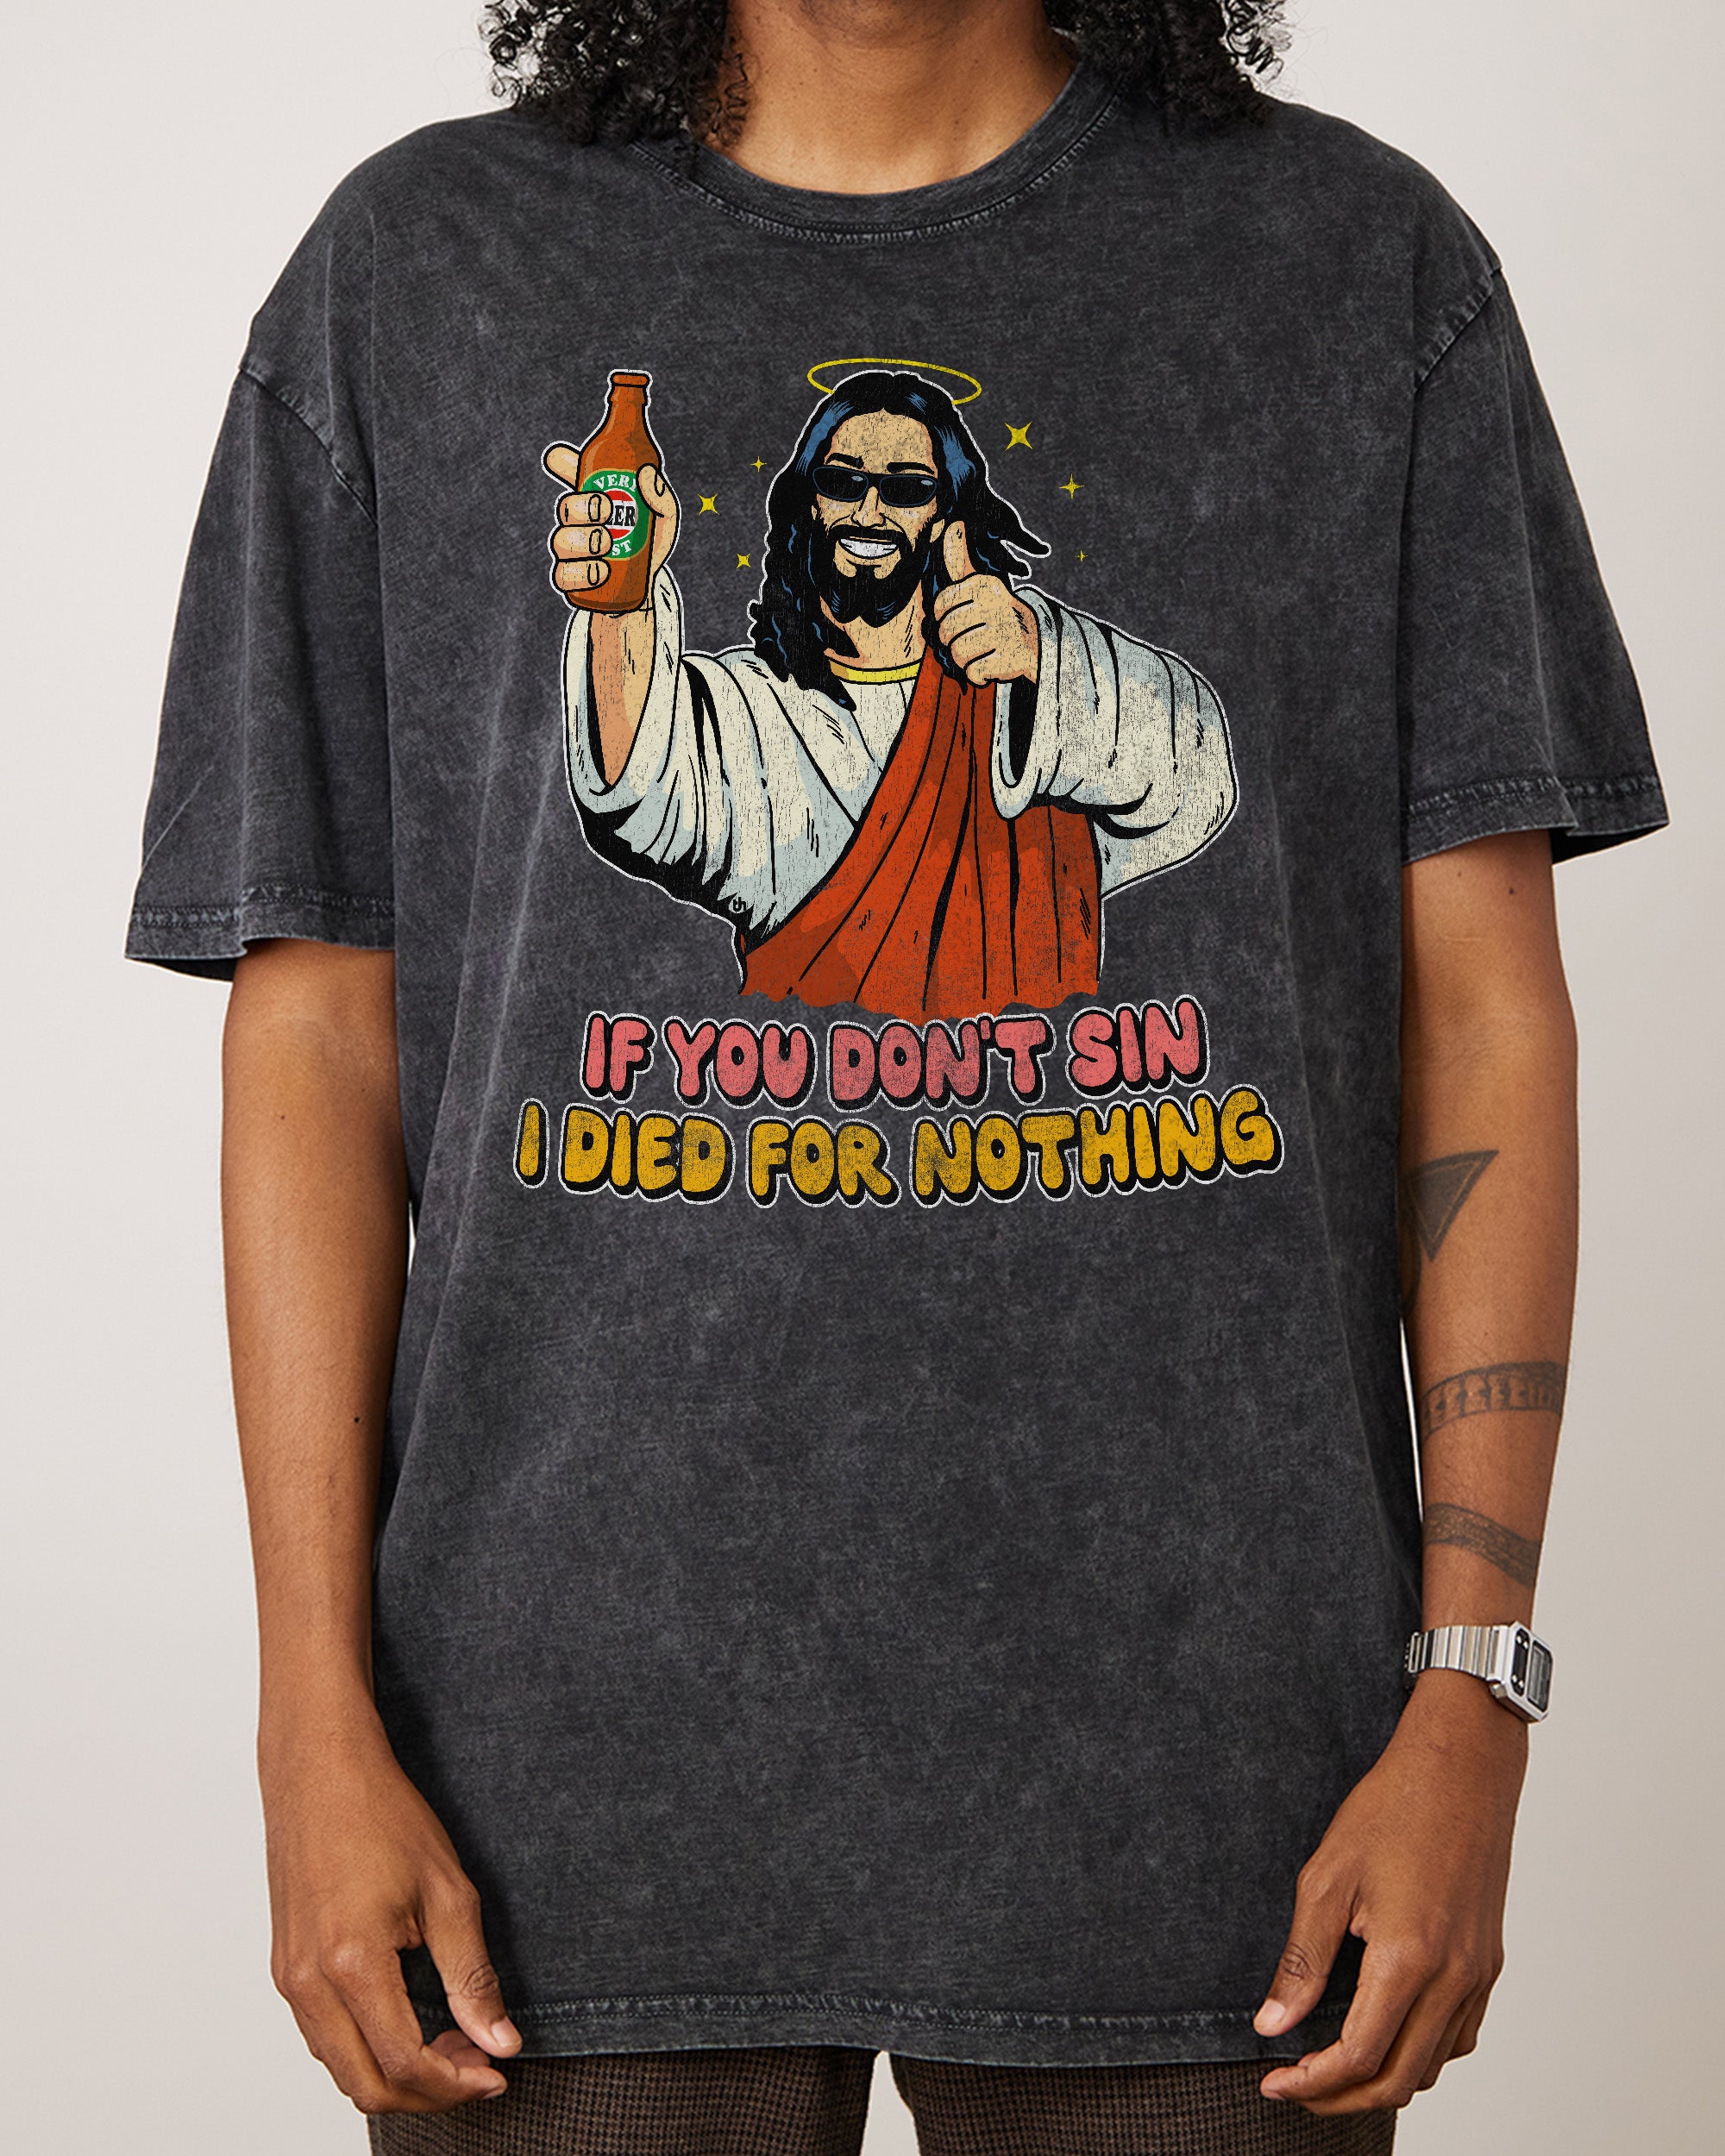 If You Don't Sin I Died for Nothing Stonewash Tee